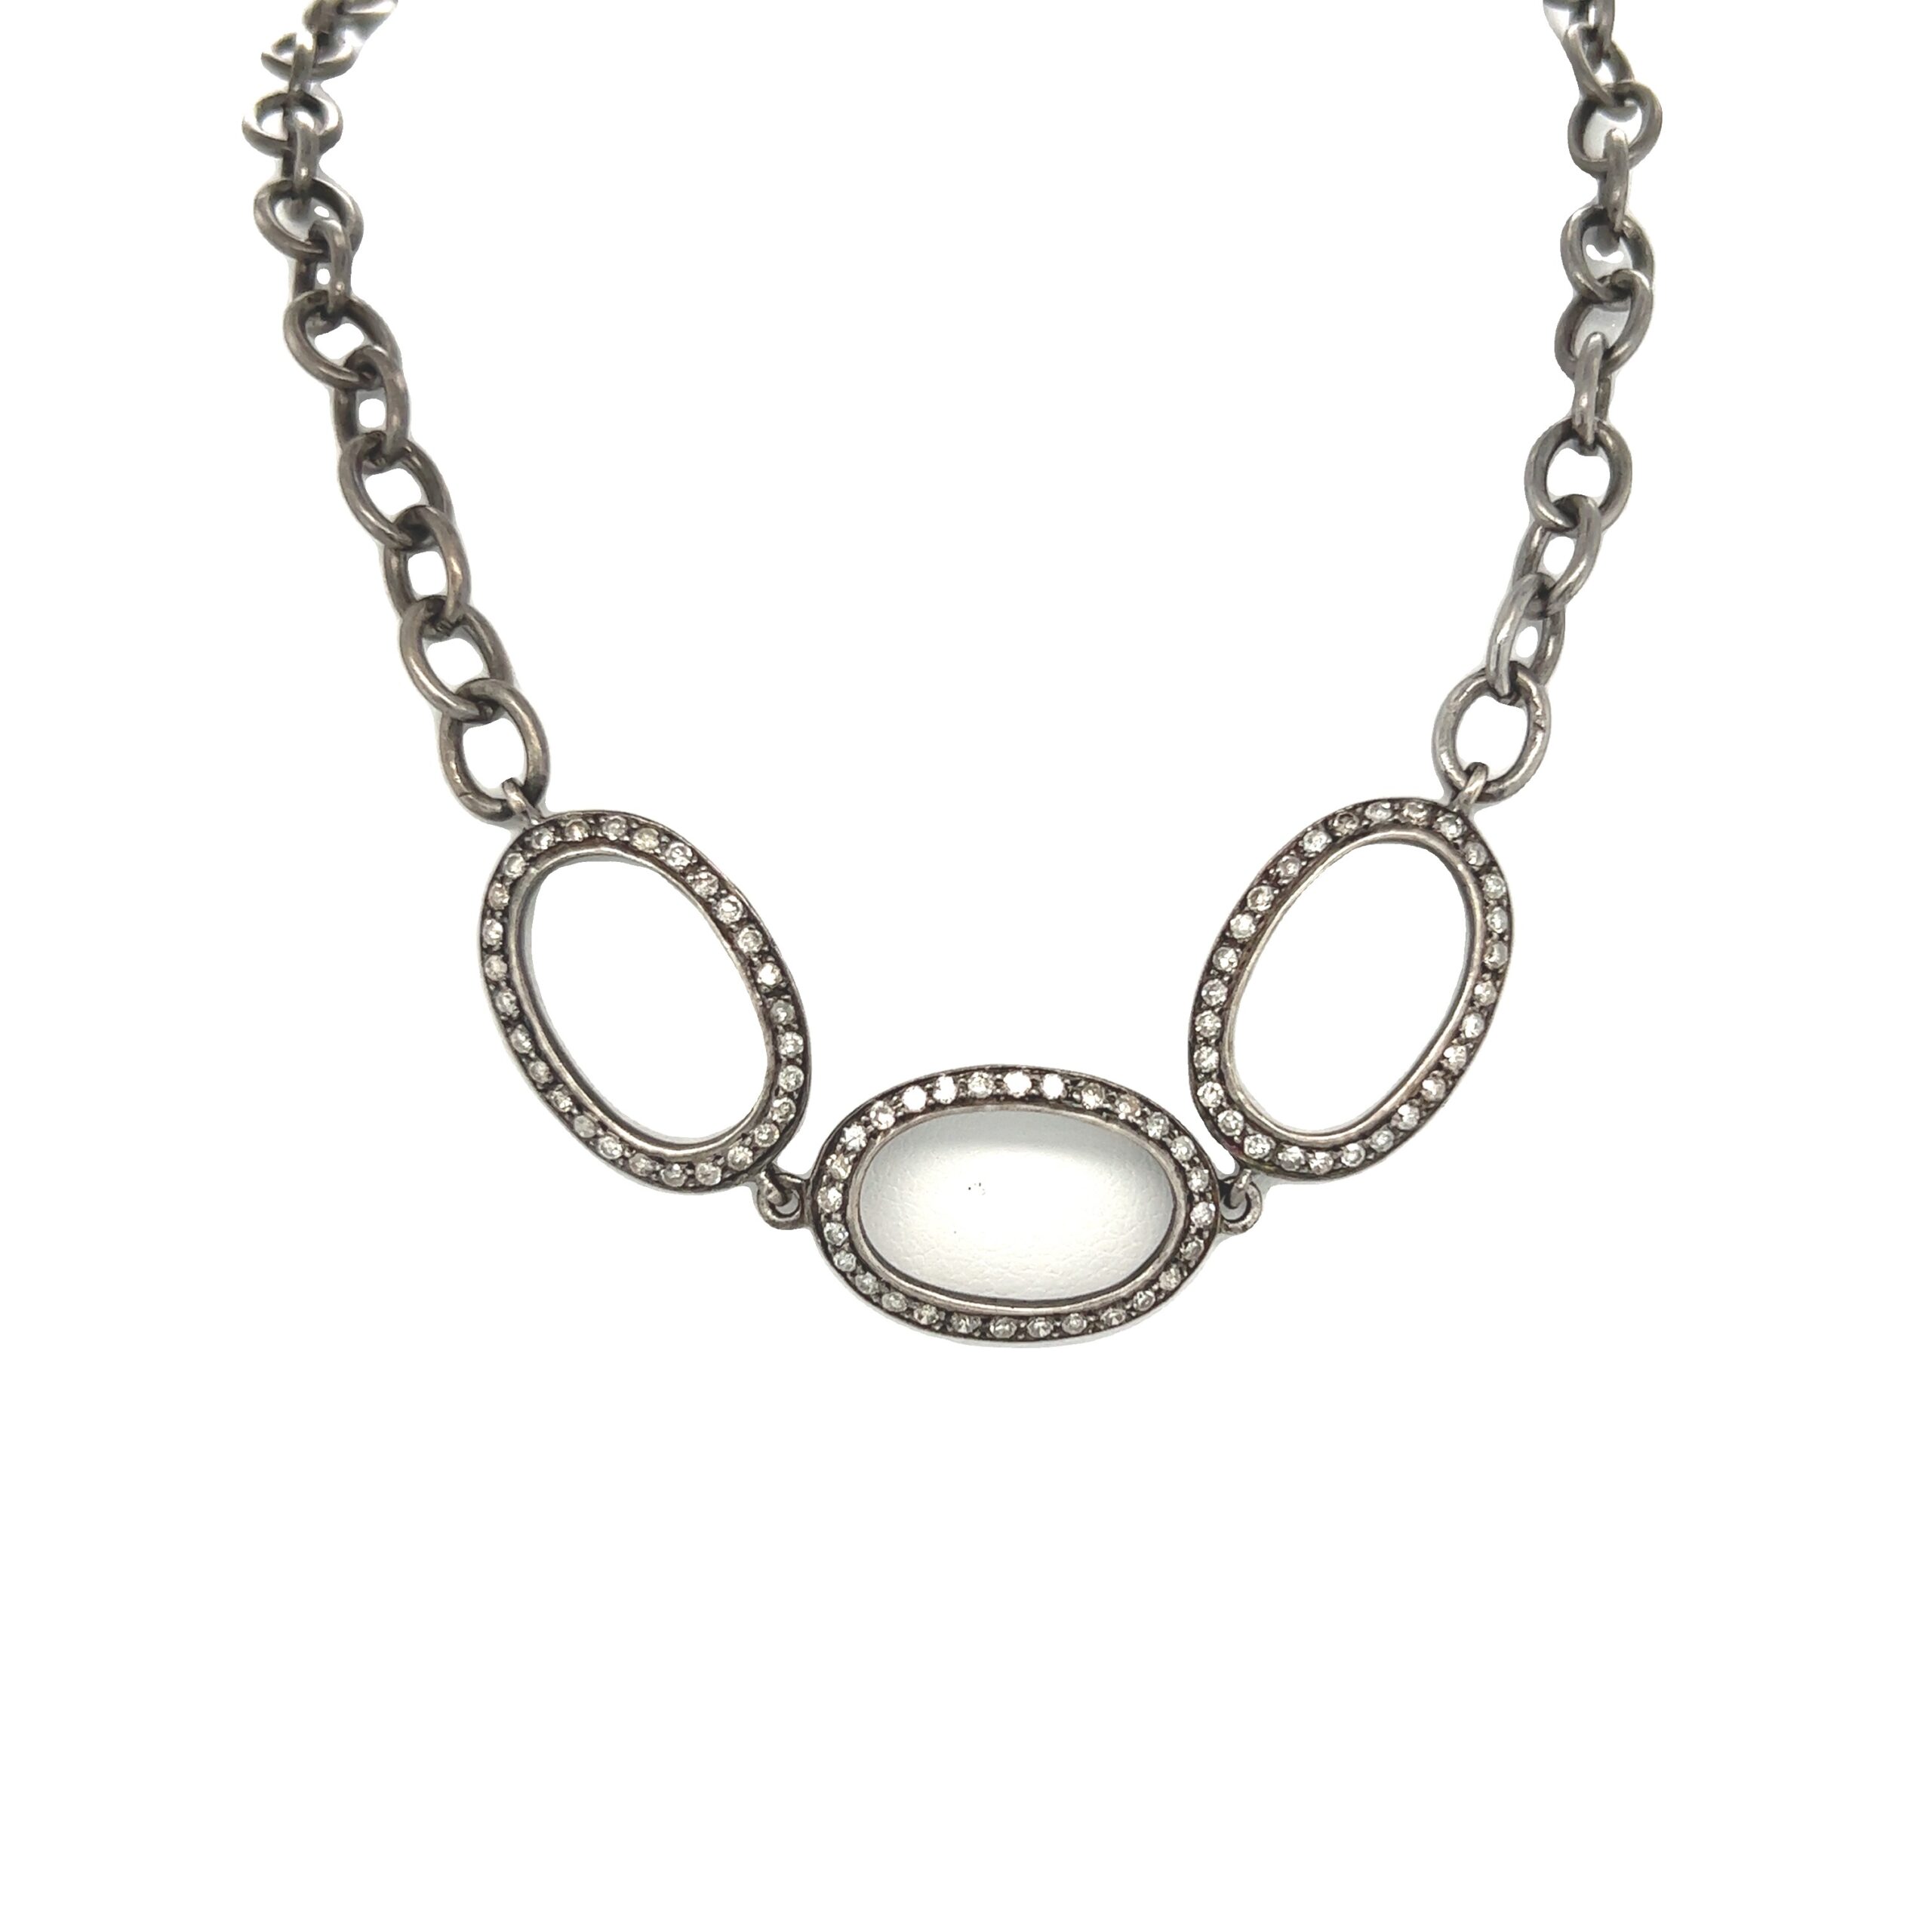 Featured image for “3 Oval Ring Necklace”